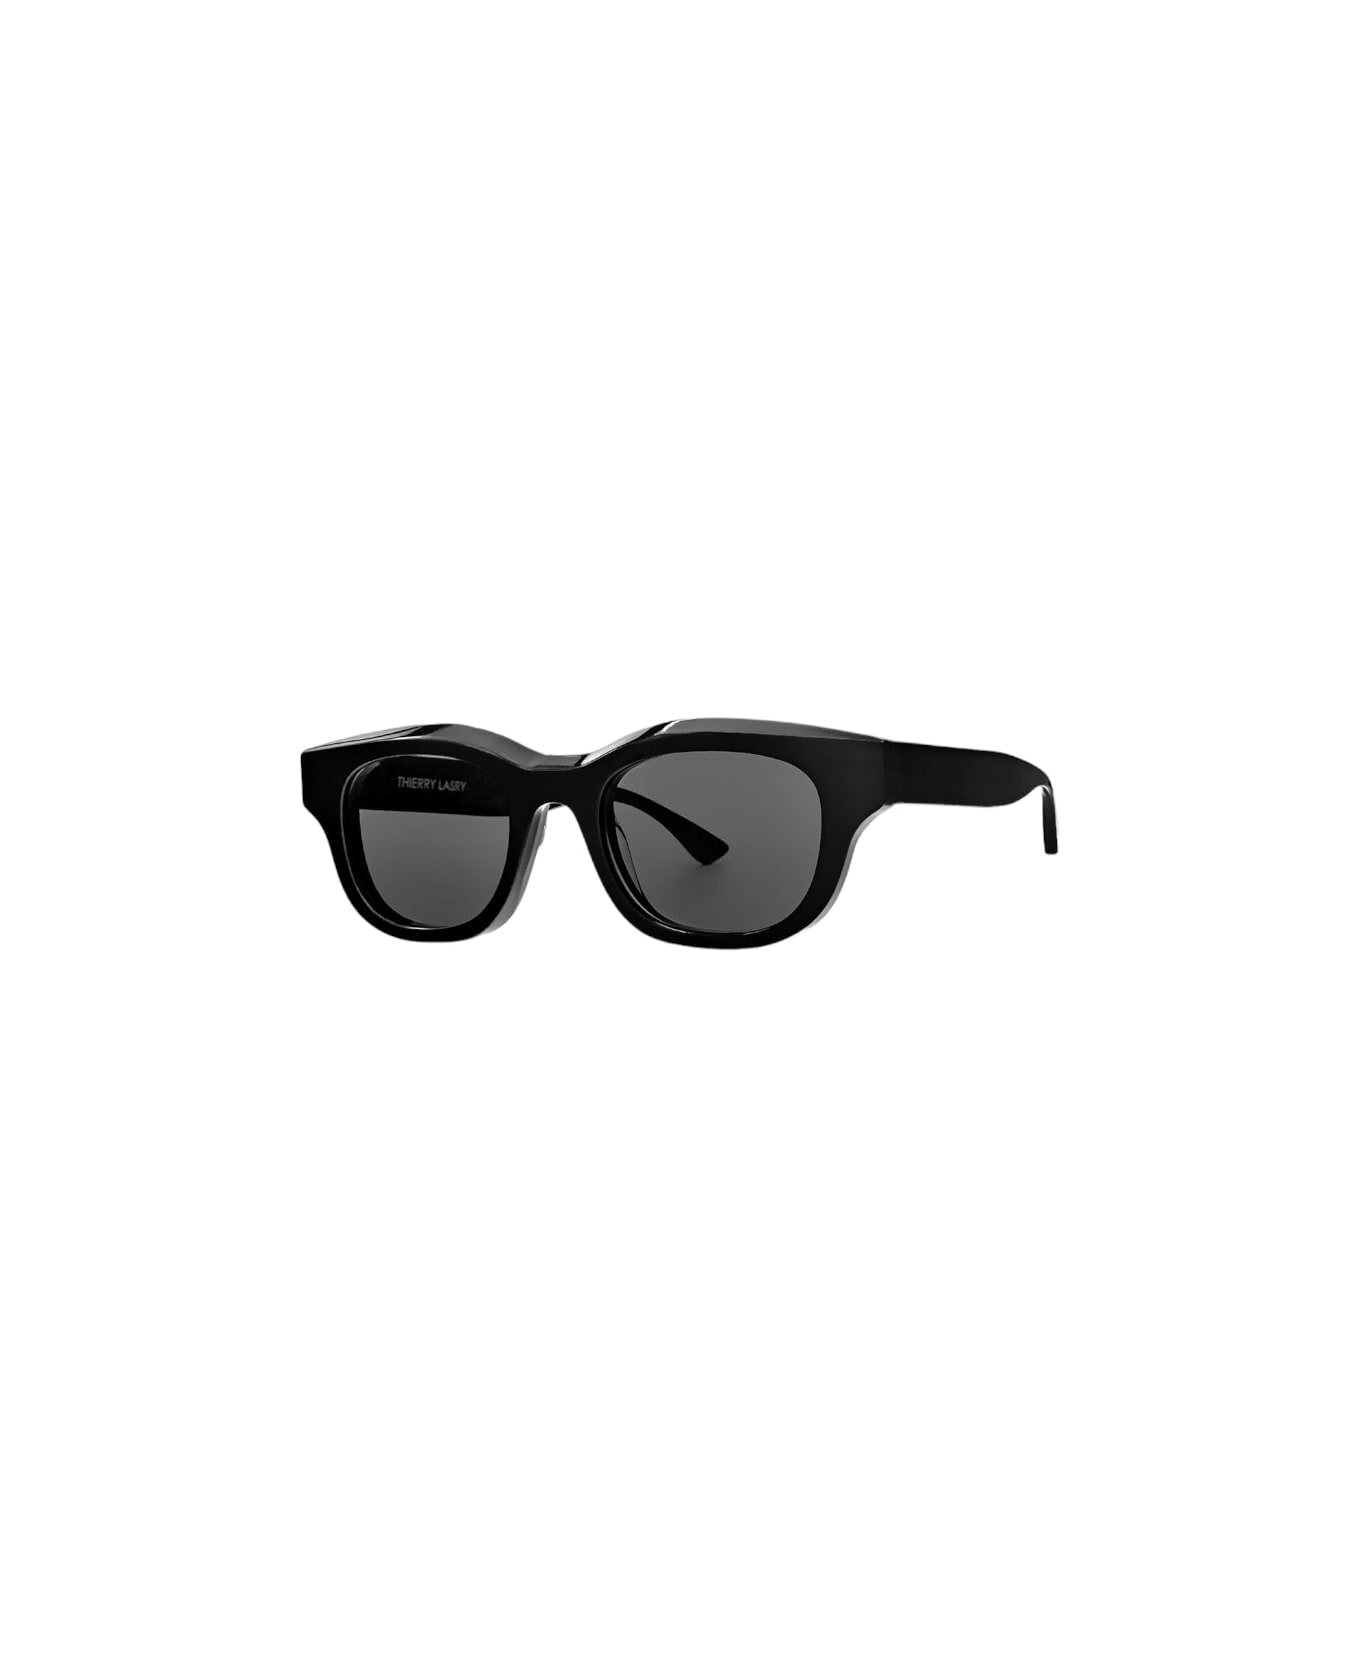 Thierry Lasry Deadly Sunglasses サングラス